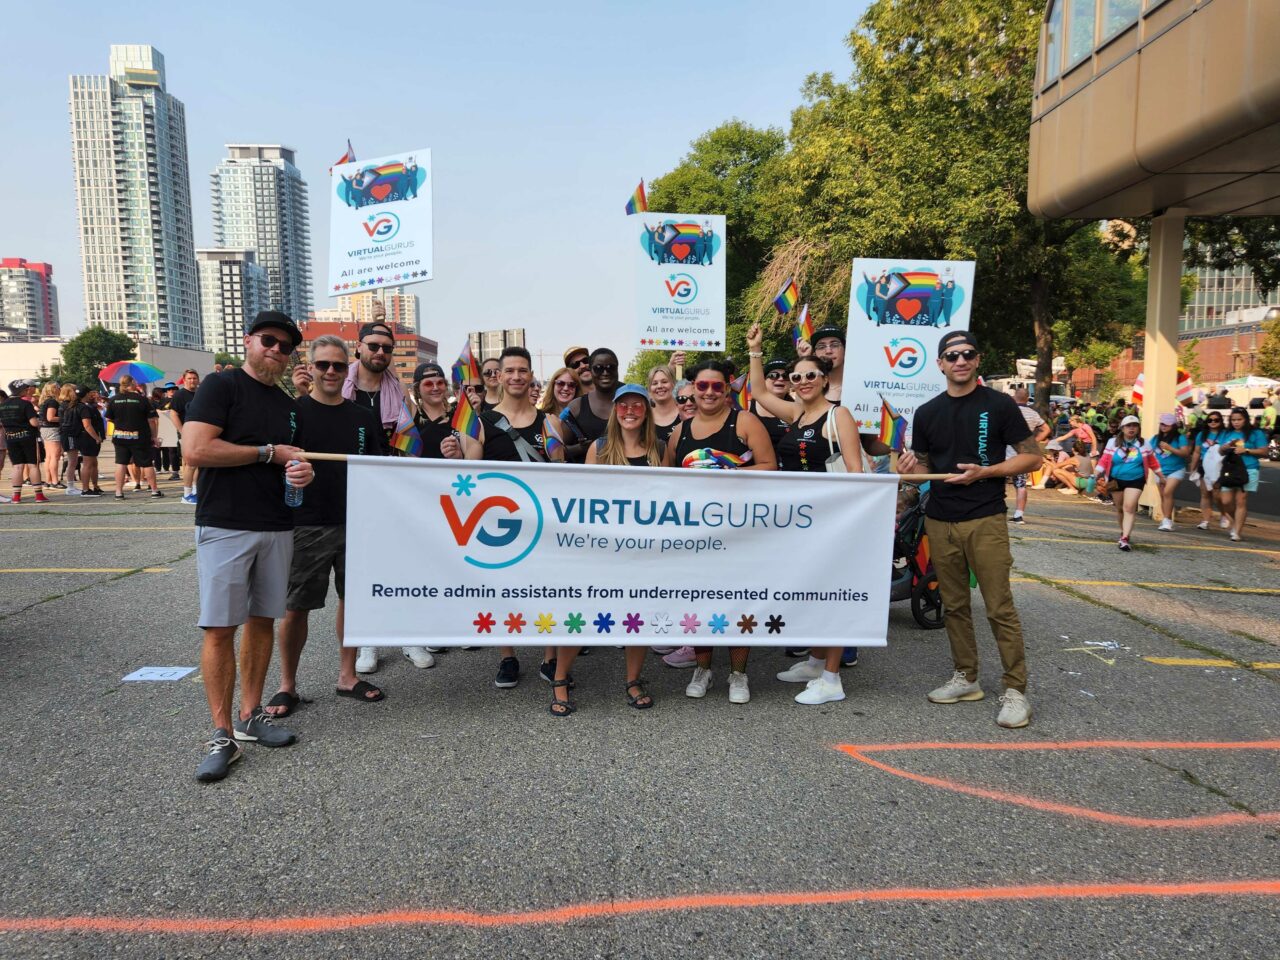 The Virtual Gurus team is standing on the street holding a company banner celebrating Pride Parade in Calgary.